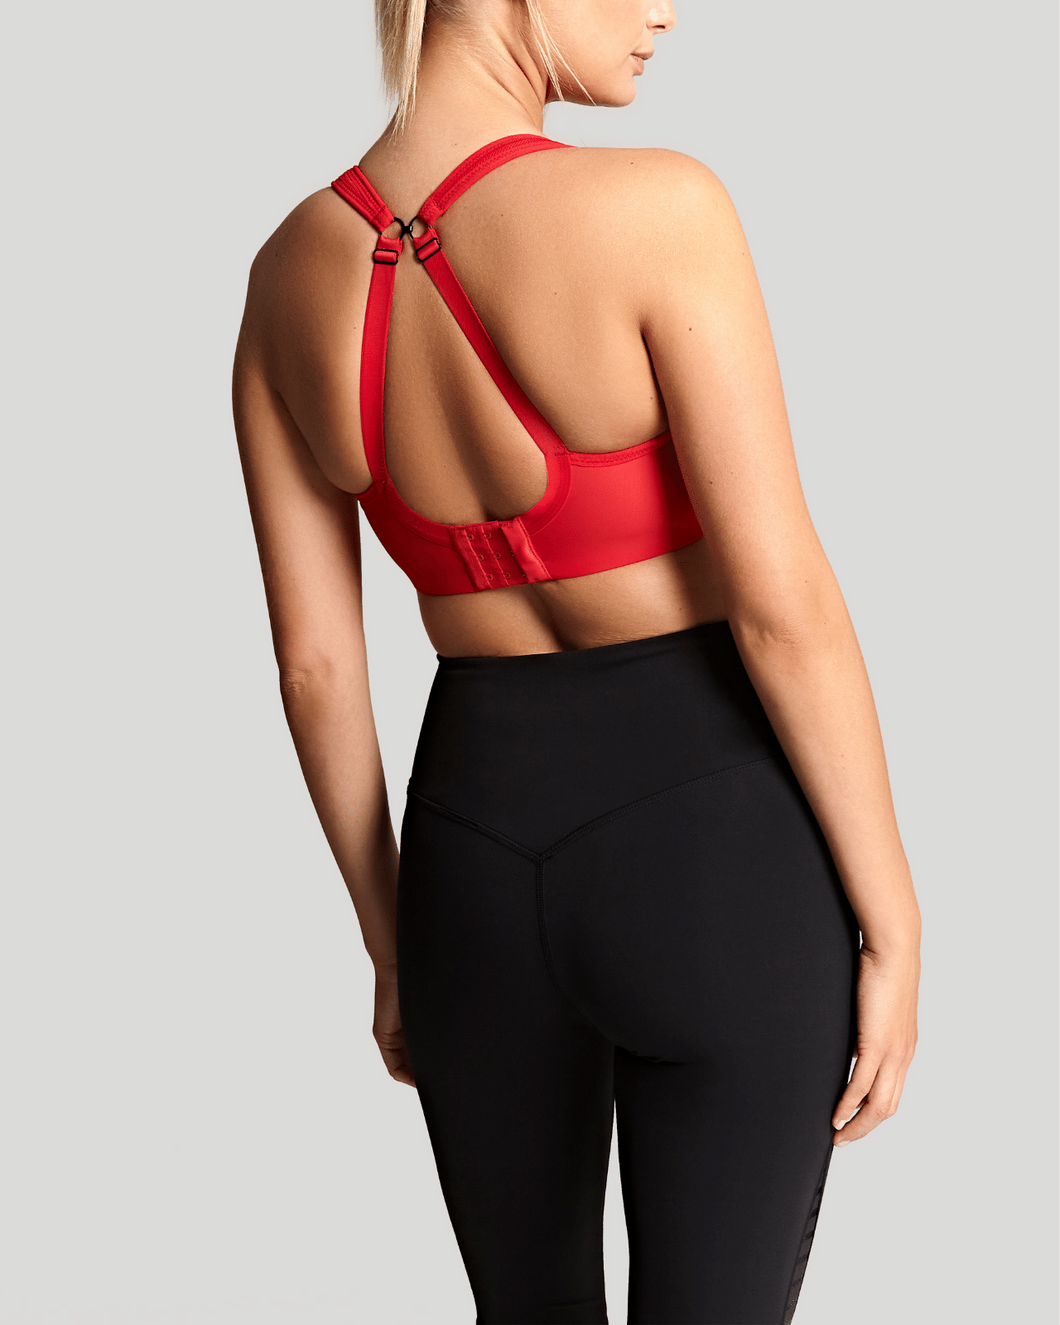 Breakout Bras - On the fifth day of giveaways Breakout Bras gave to me, a  customer favorite Panache sports bra FOR FREE! Win a Panache sports bra by  following these simple rules